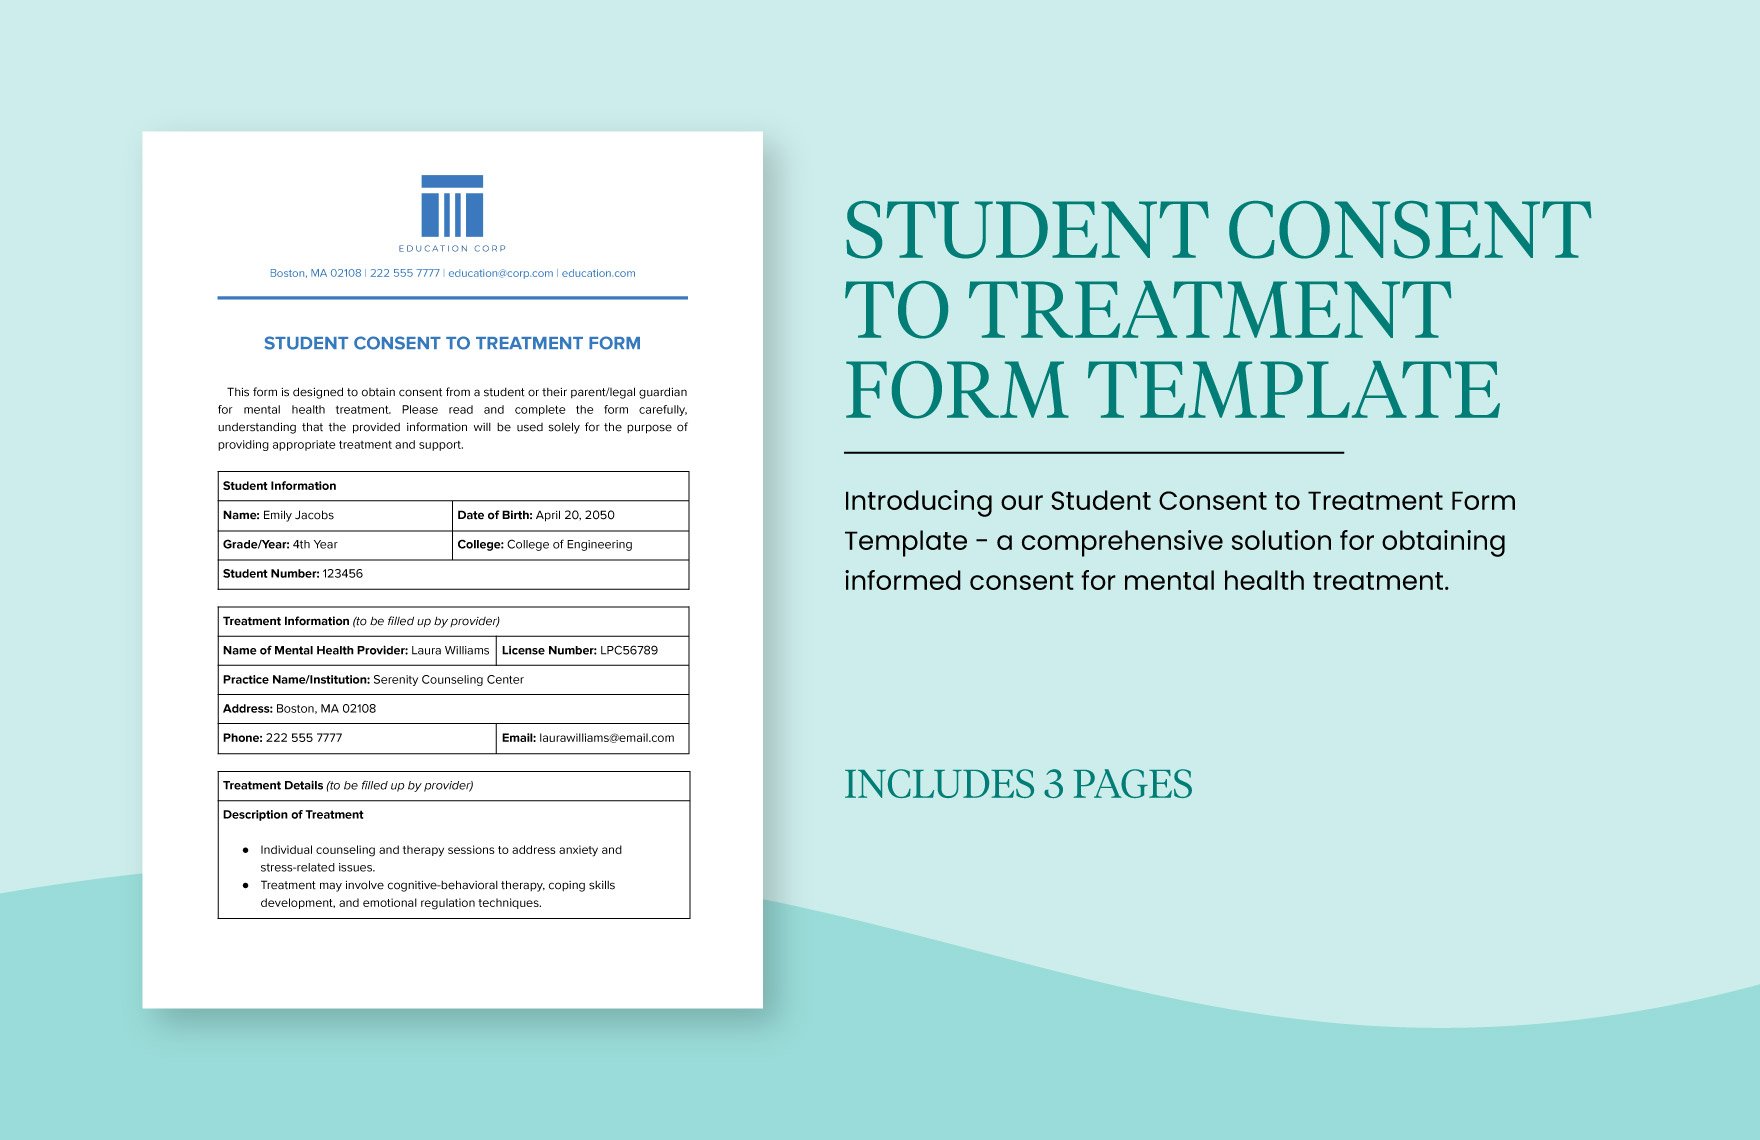 Student Consent to Treatment Form Template